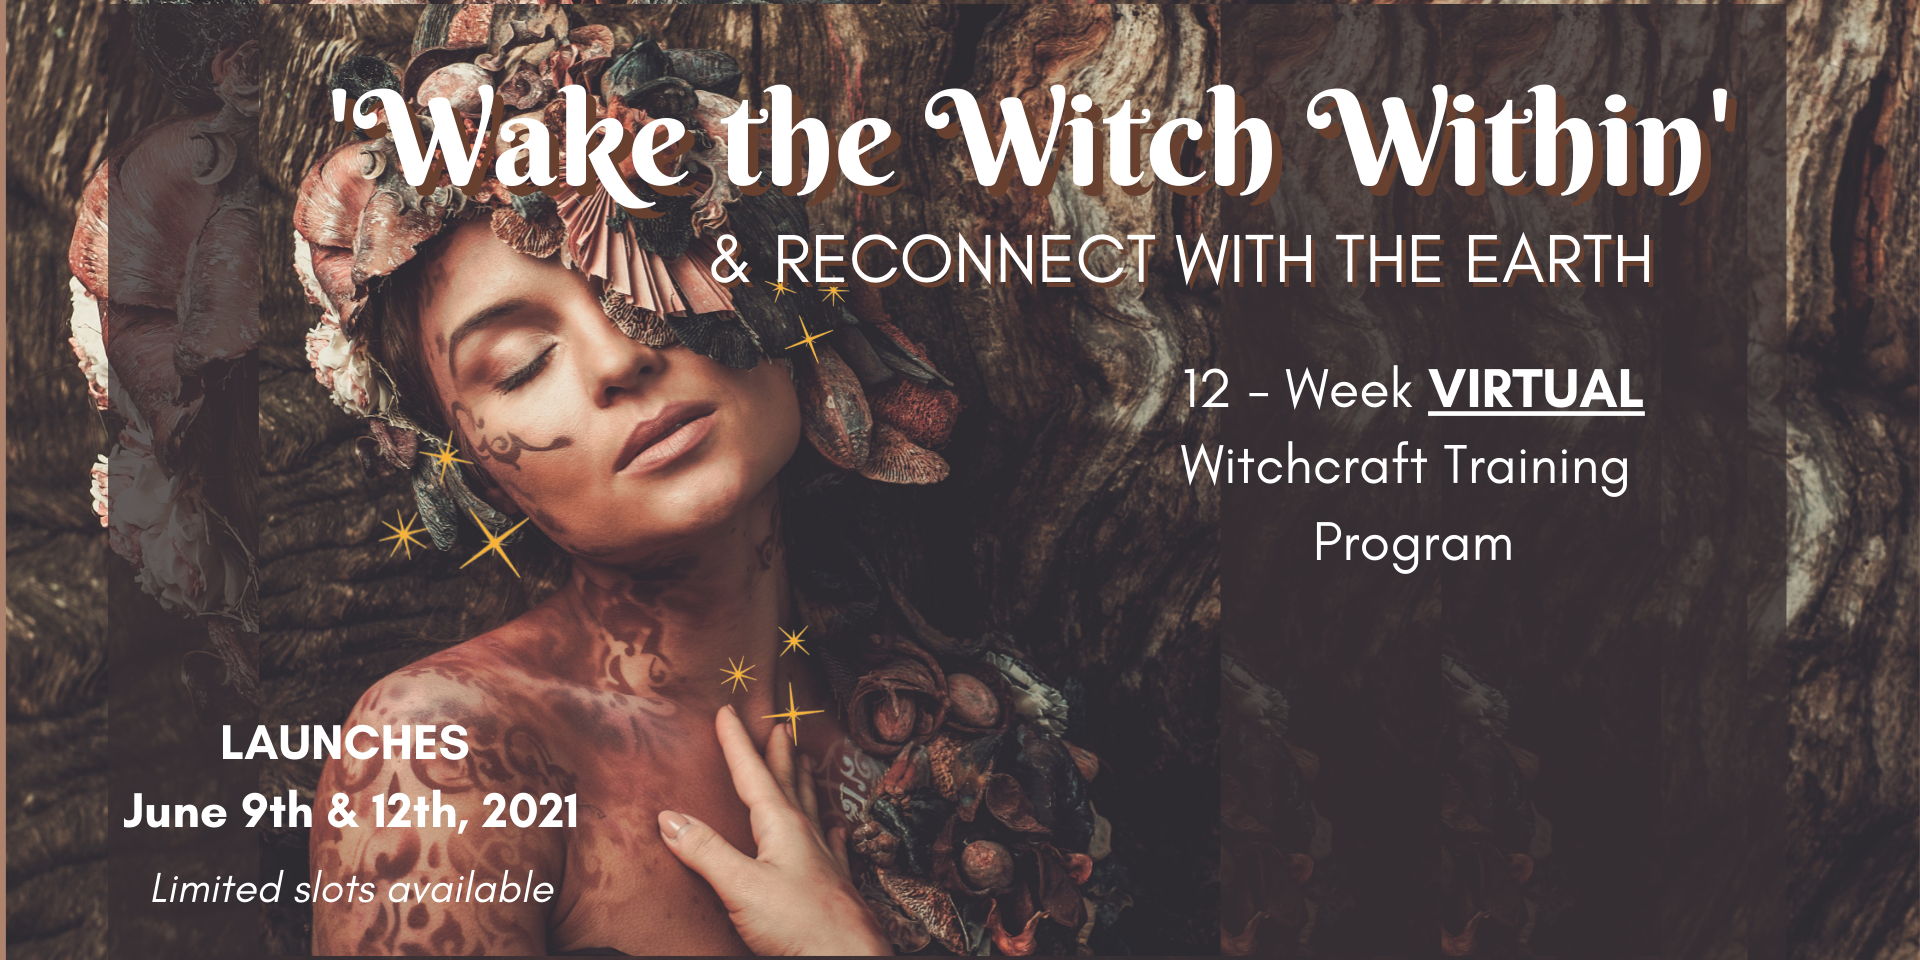 'Wake the Witch Within' promotional image